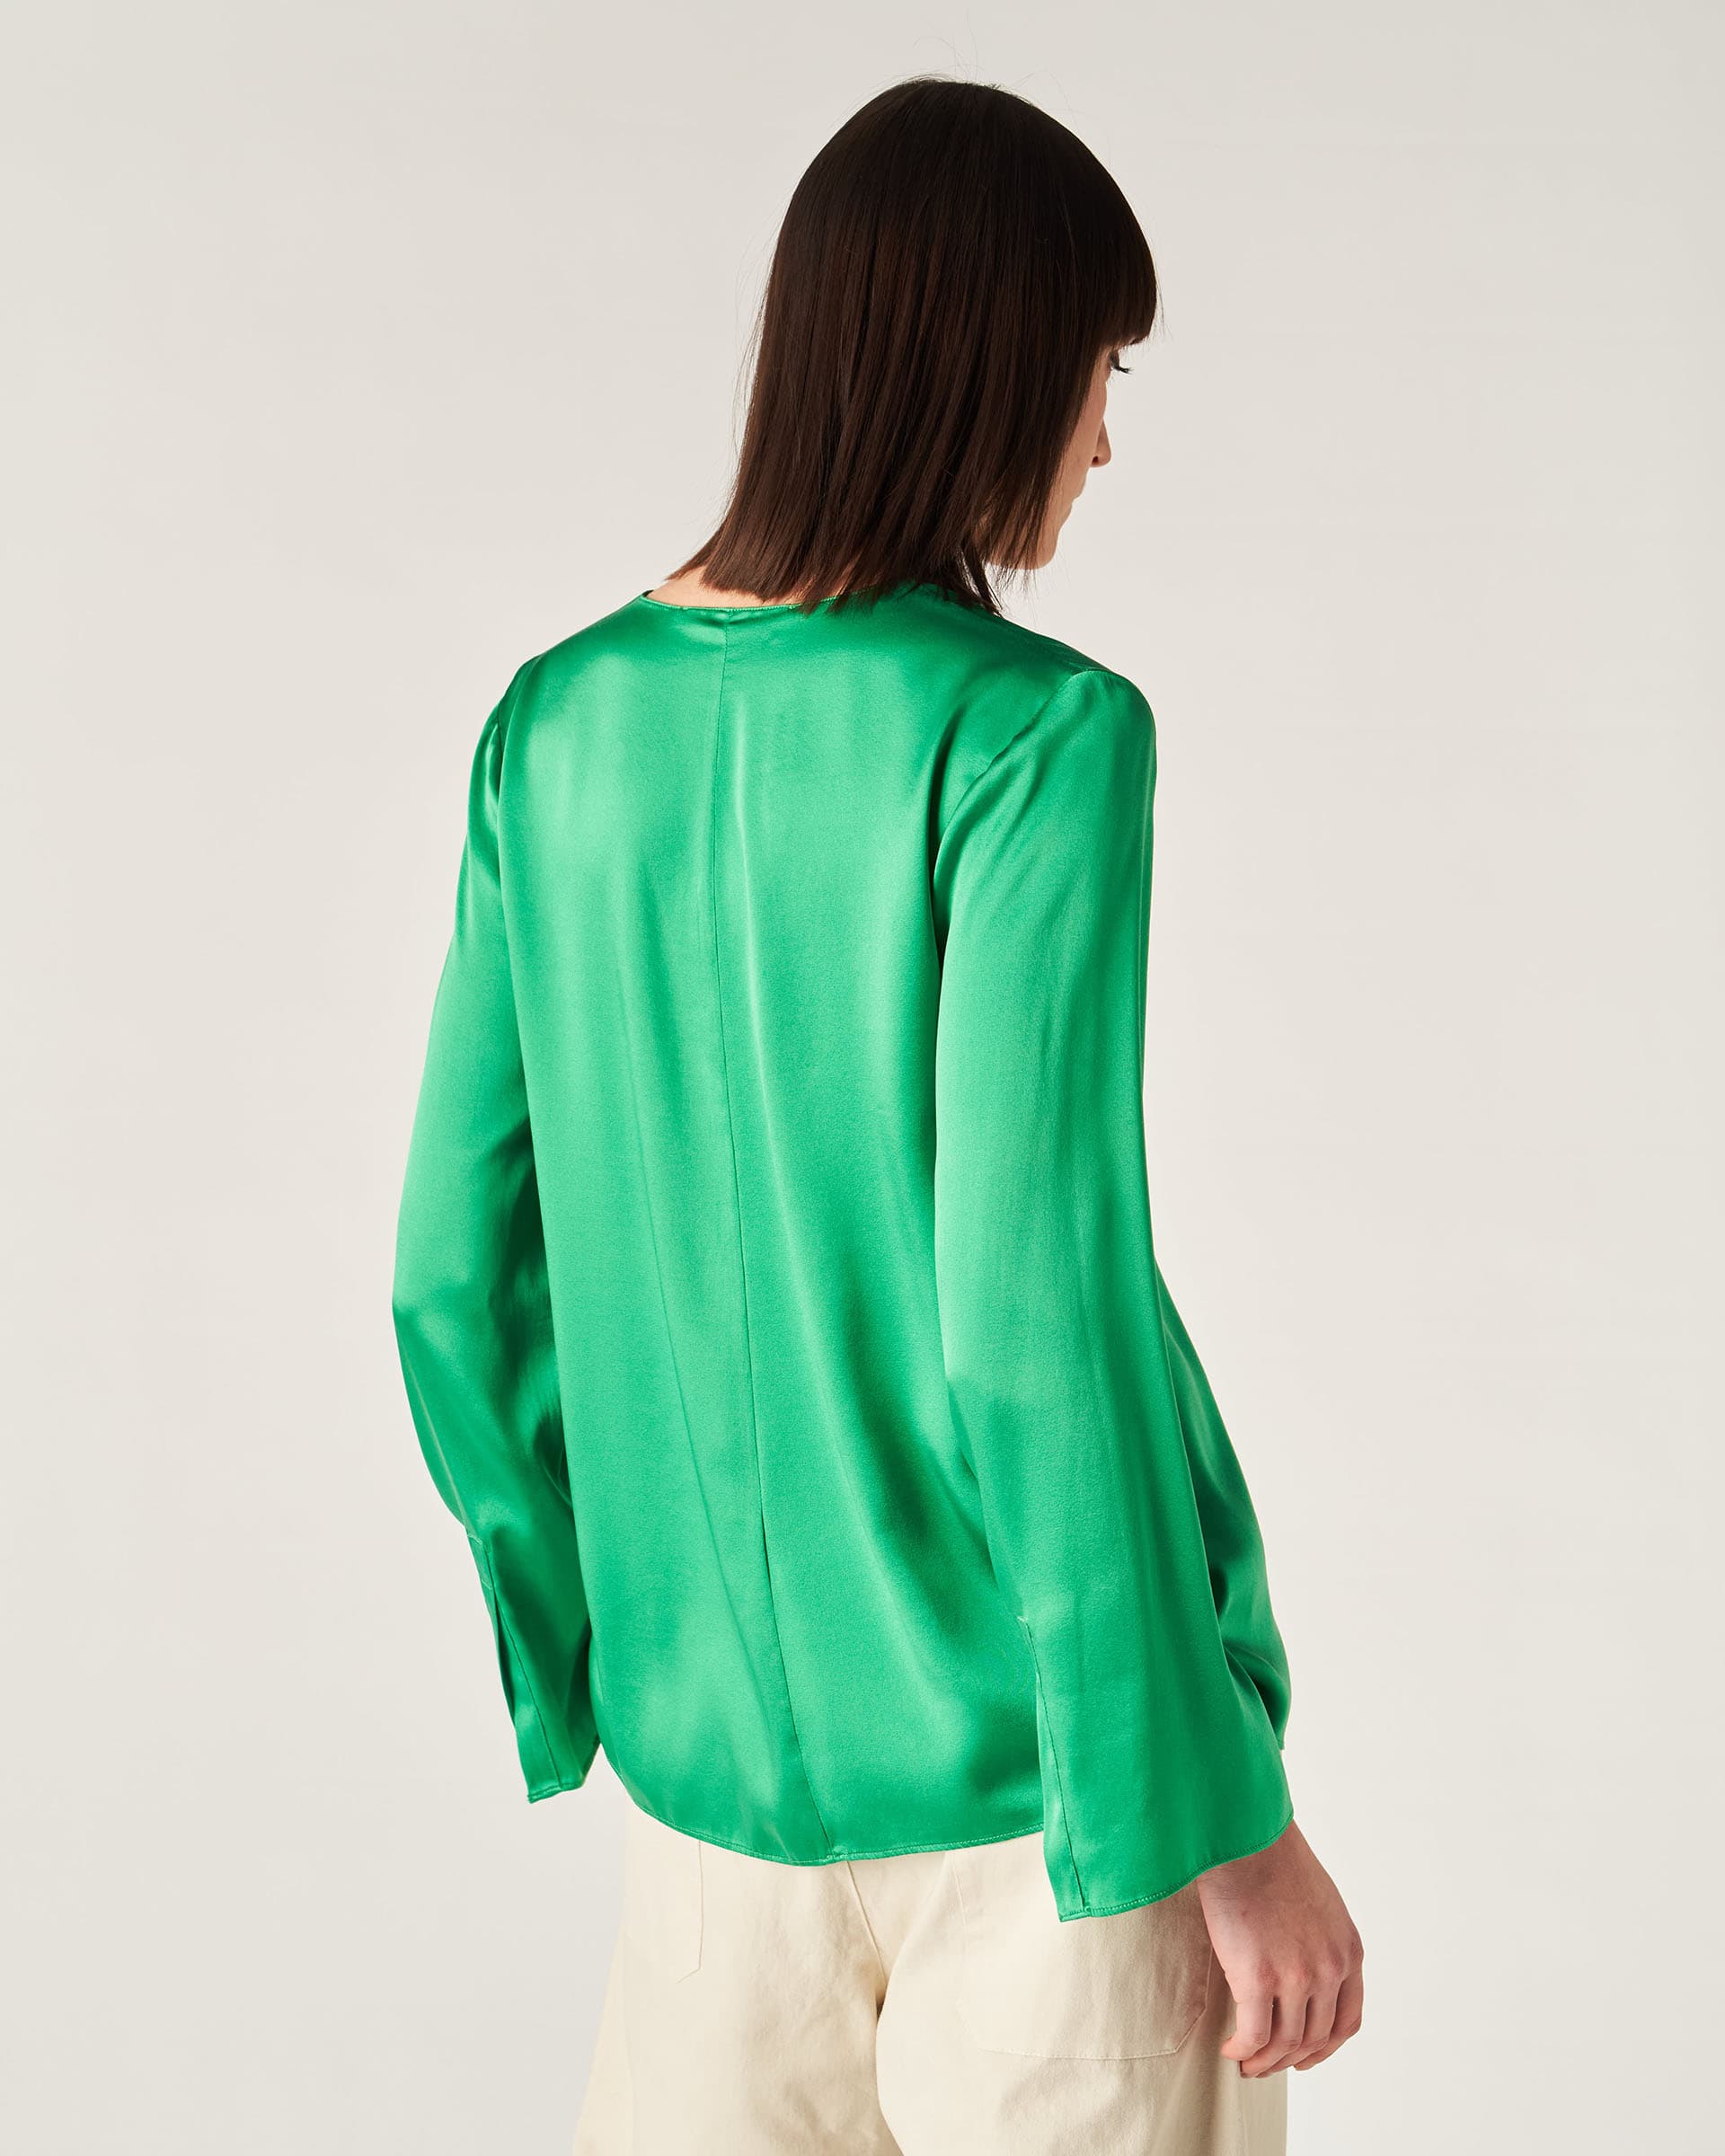 The Market Store | Satin Top With V-neck